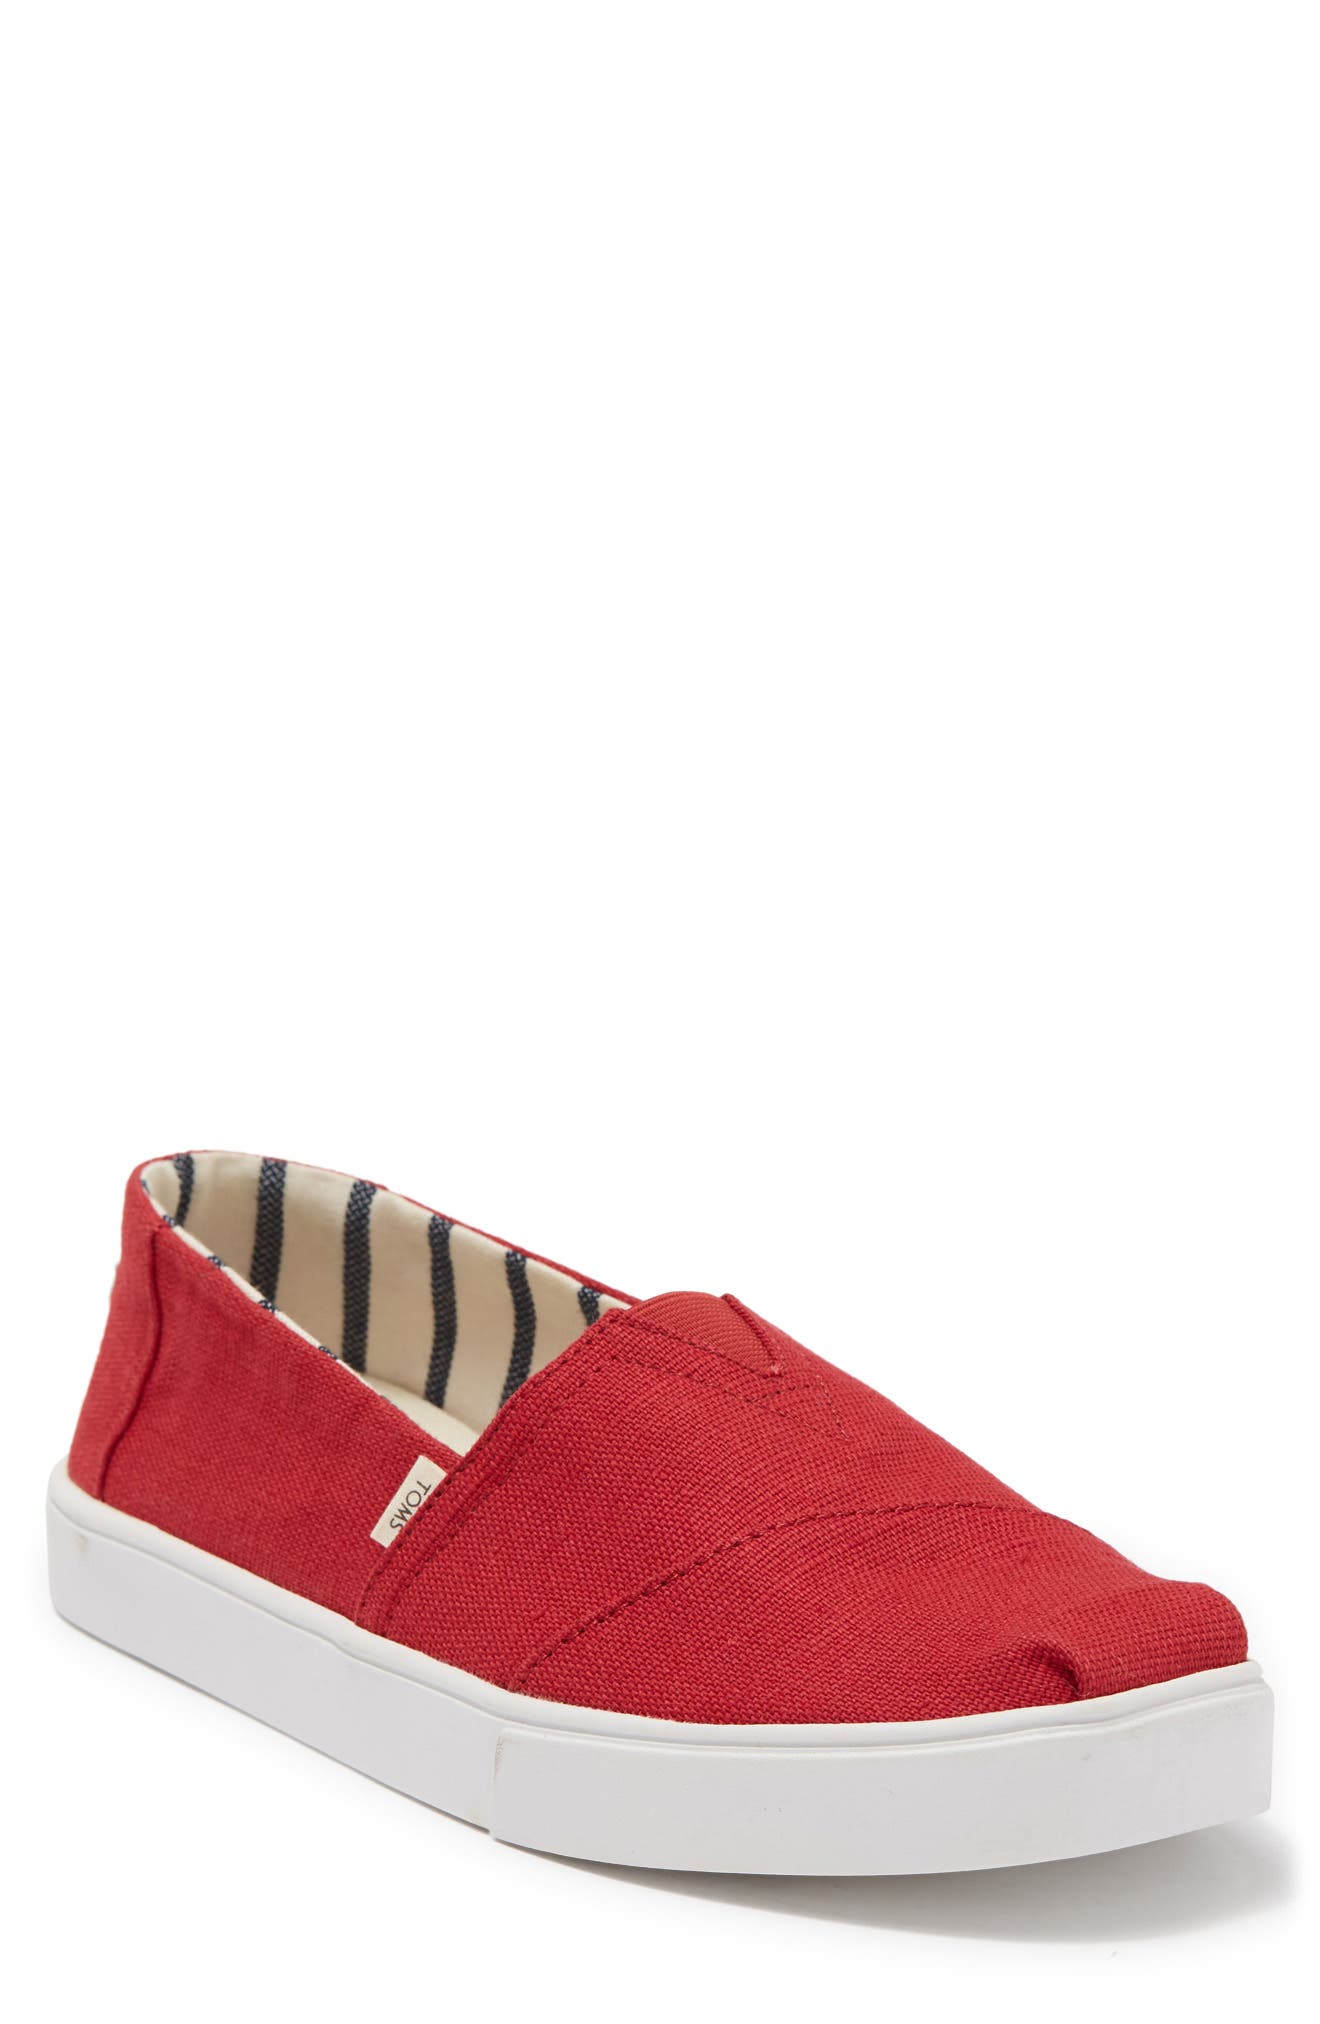 Toms Alpa Canvas Slip-on Shoe In Red Heritage Canvas